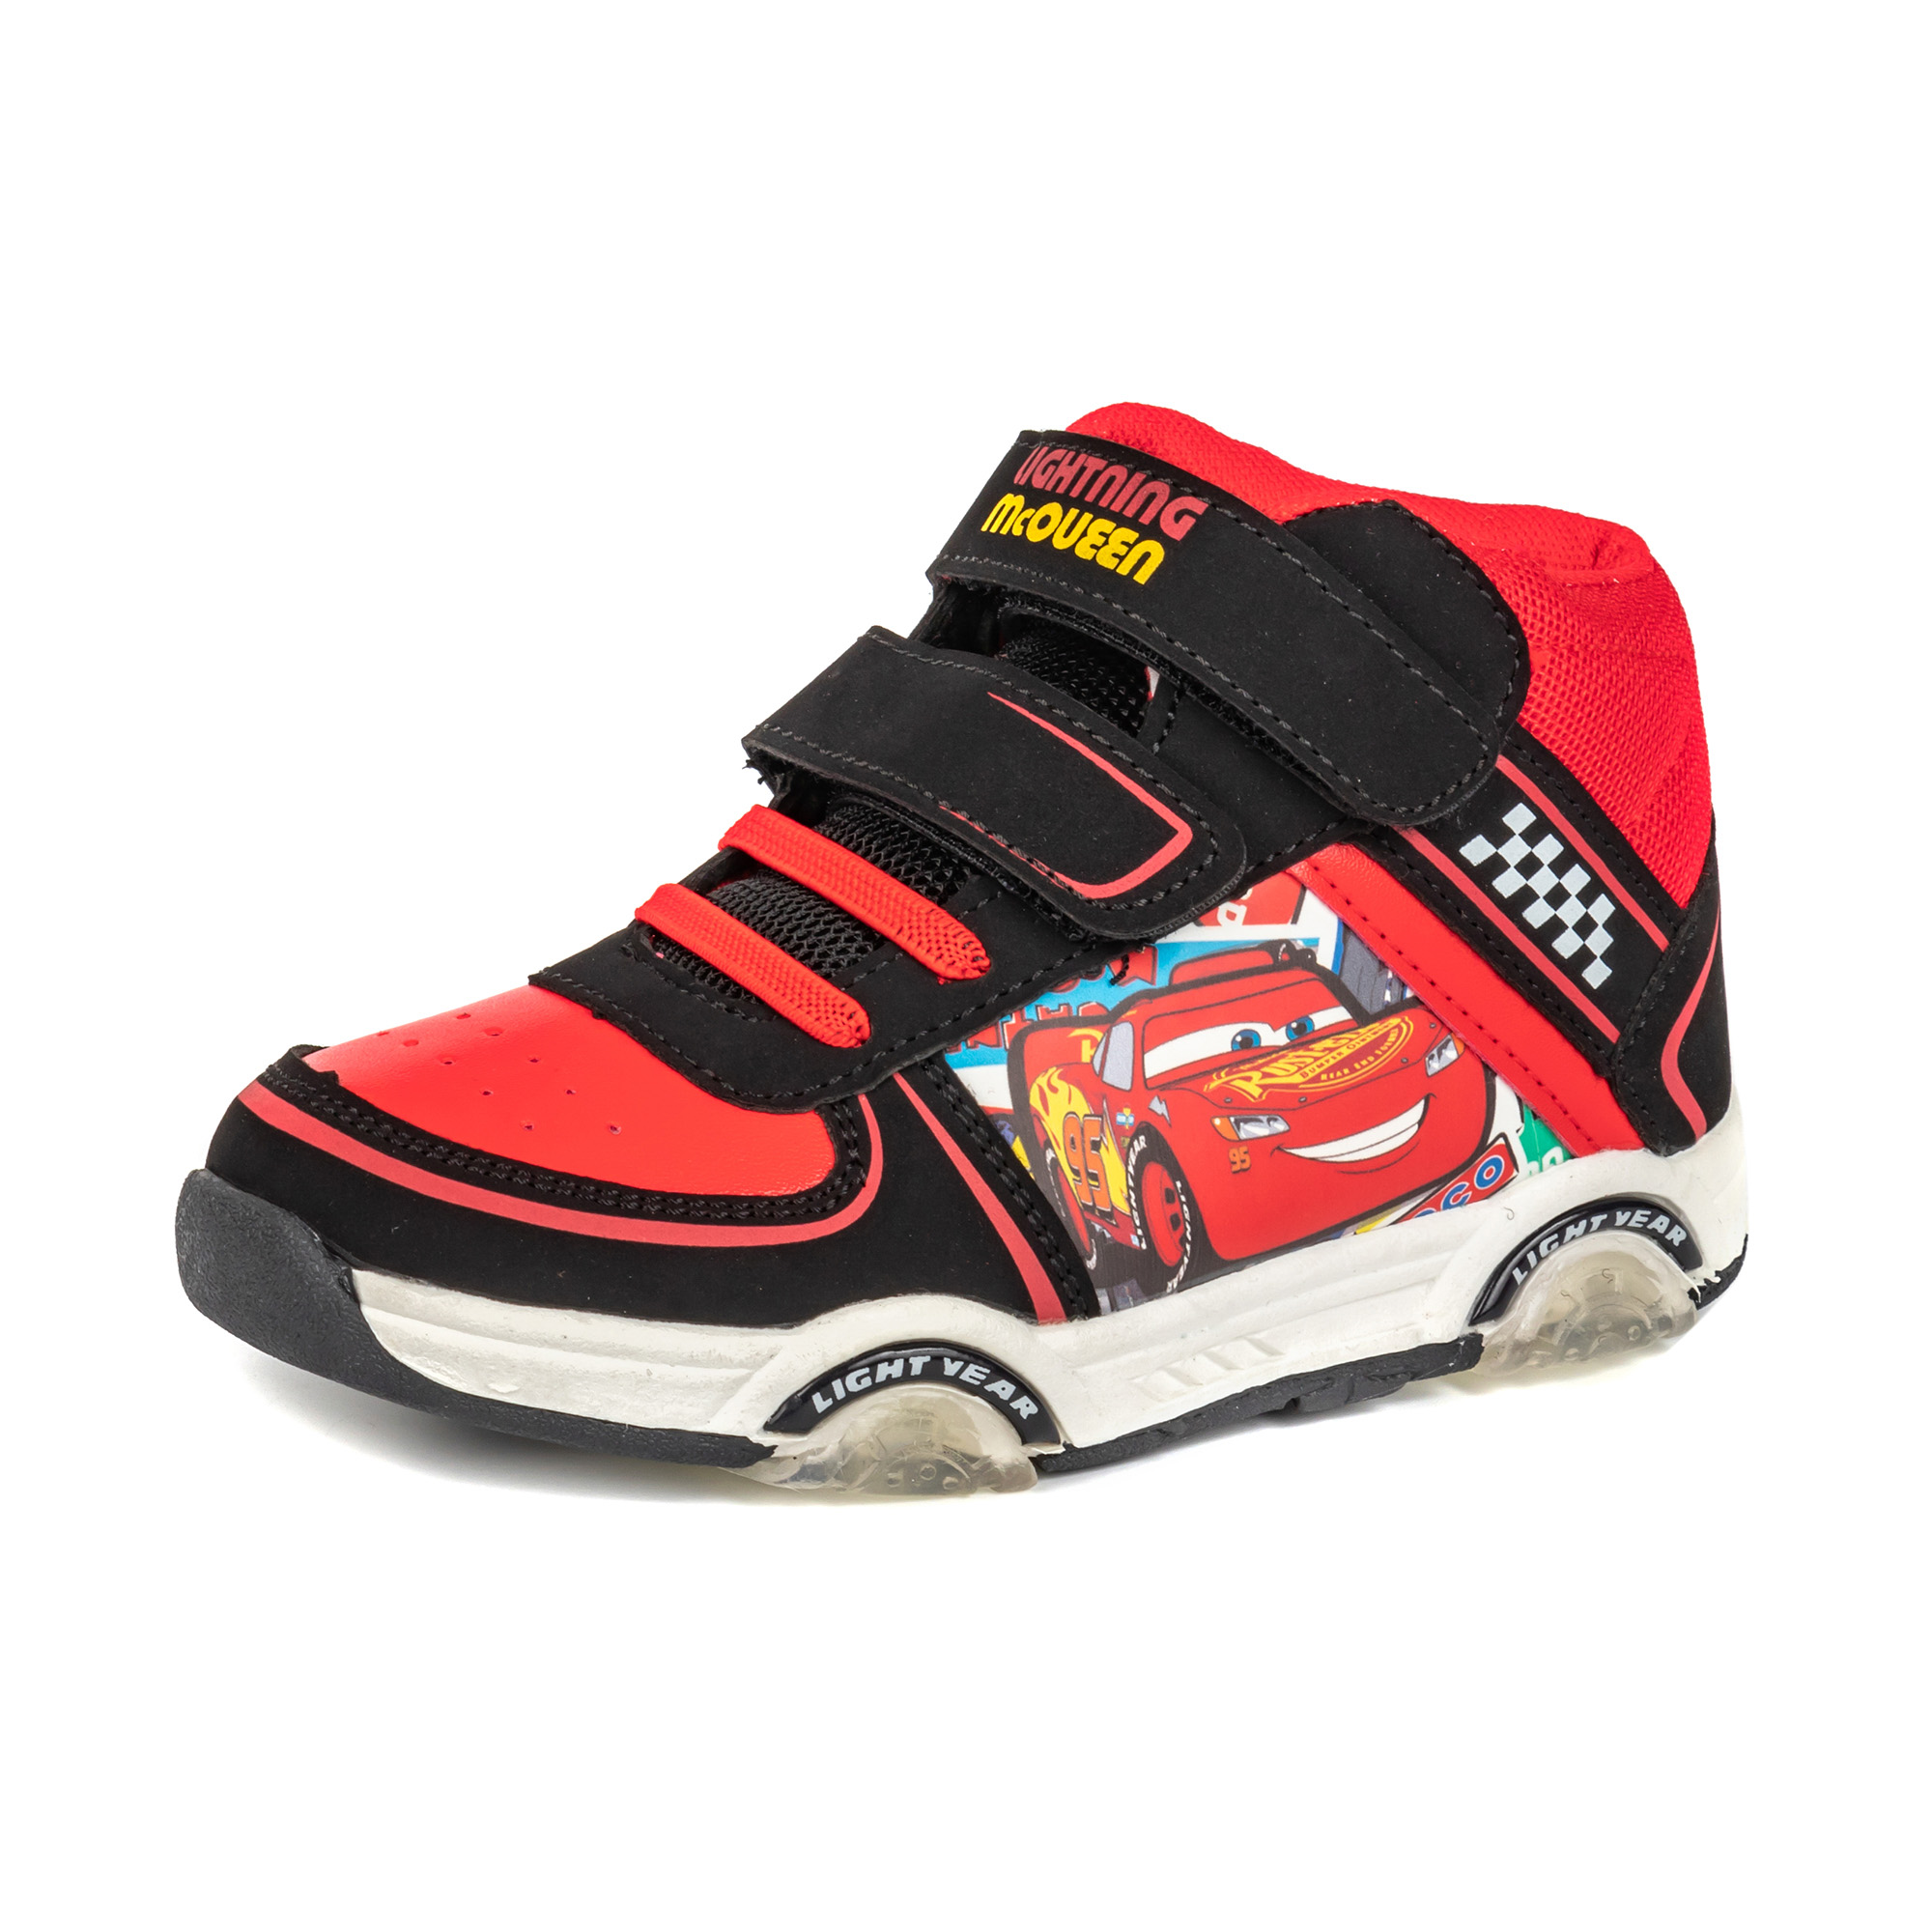 Sport shoes,Basketball Shoes,Children shoes,Black/Red,PU Upper,VELCRO +Shoe lace style,TPR Outsole